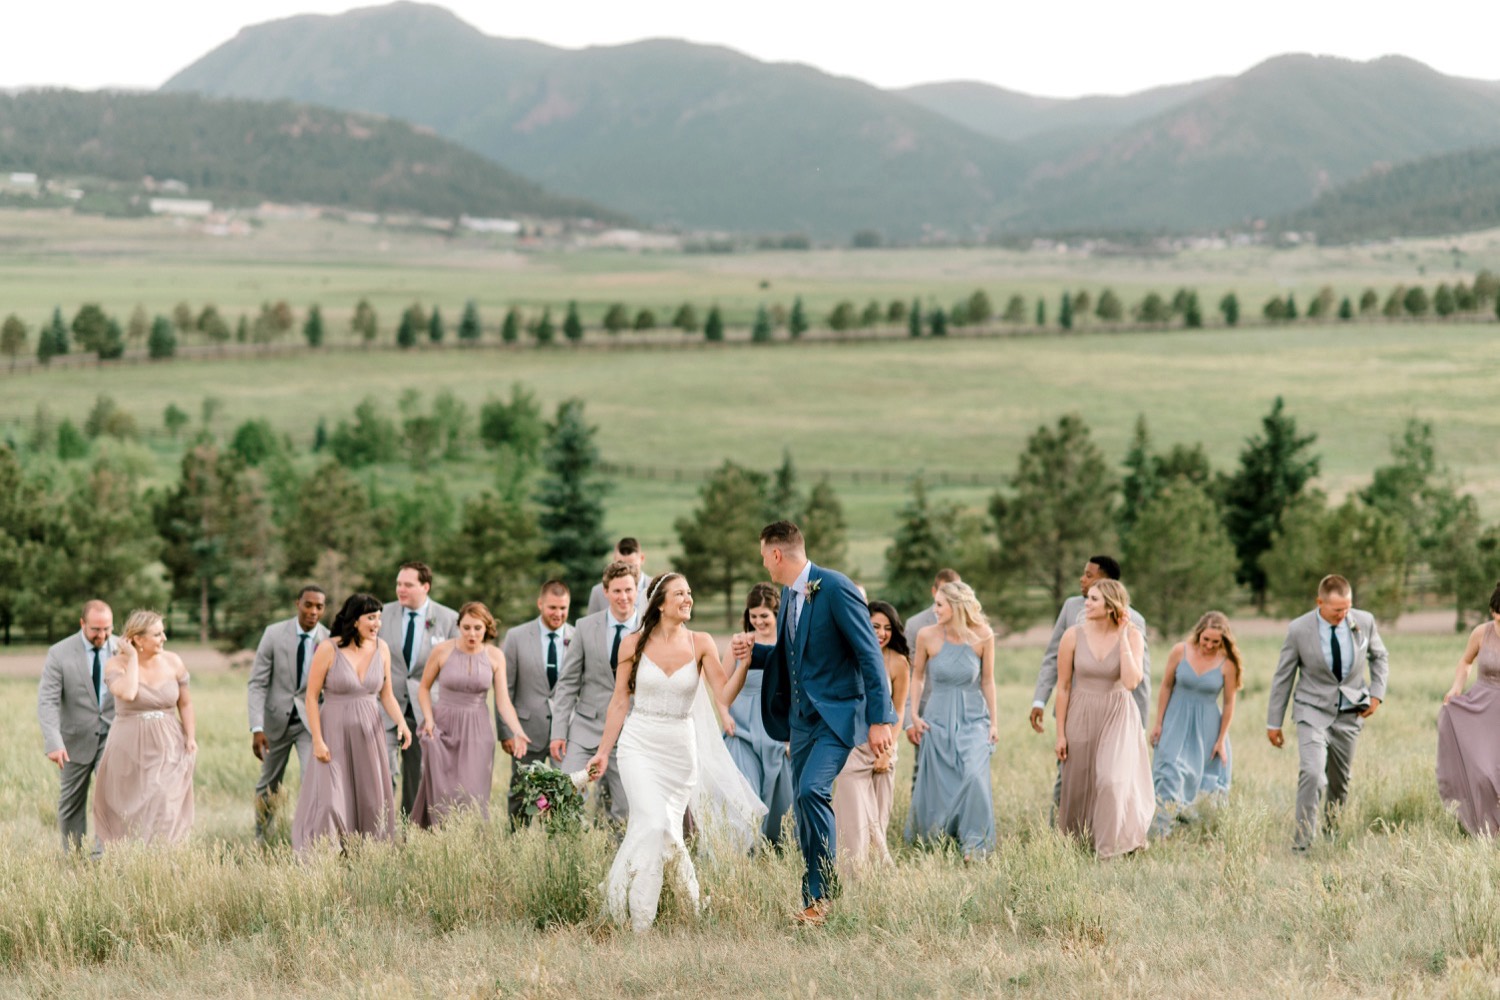 Kristen and Charlton are joined by their wedding party with the groomsmen in their blue ties and the bridesmaids in their purple, blush, and blue gowns as they walk through the field of Spruce Mountain Ranch in Larkspur, Colorado.